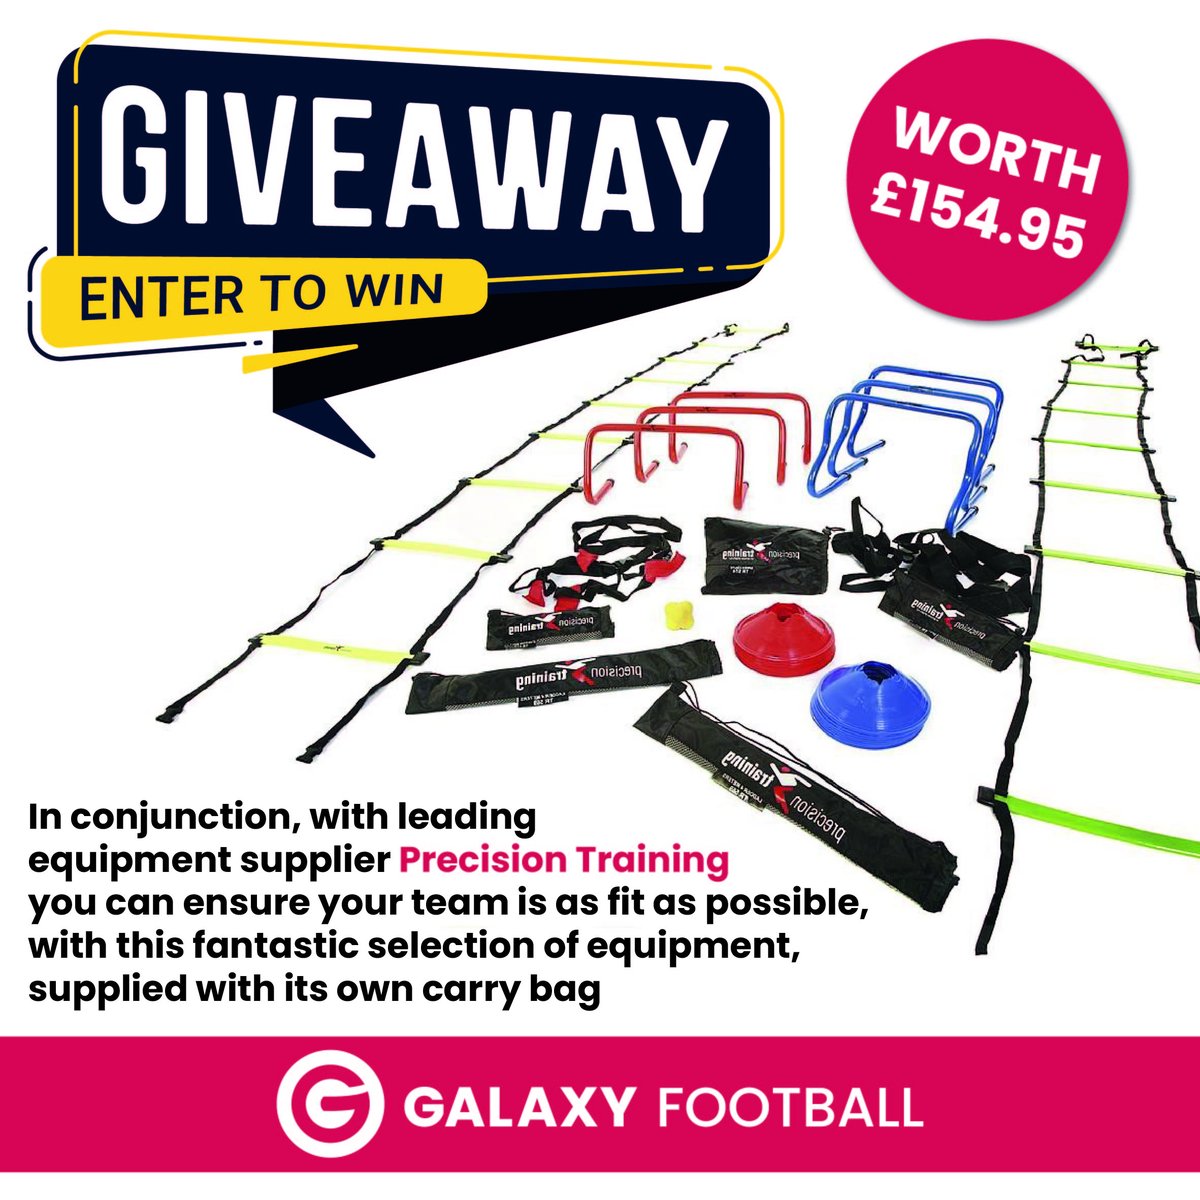 🚨WIN the ULTIMATE Training Speed Agility Kit worth an amazing £154.95!!🚨

RT & Follow to enter. Competition closes 24/07/22 at 6pm. 

#Win #Precision #Agility #Cones #SpeedLadder #Hurdles #Fitness #trainingequipment #Competition #Giveaway